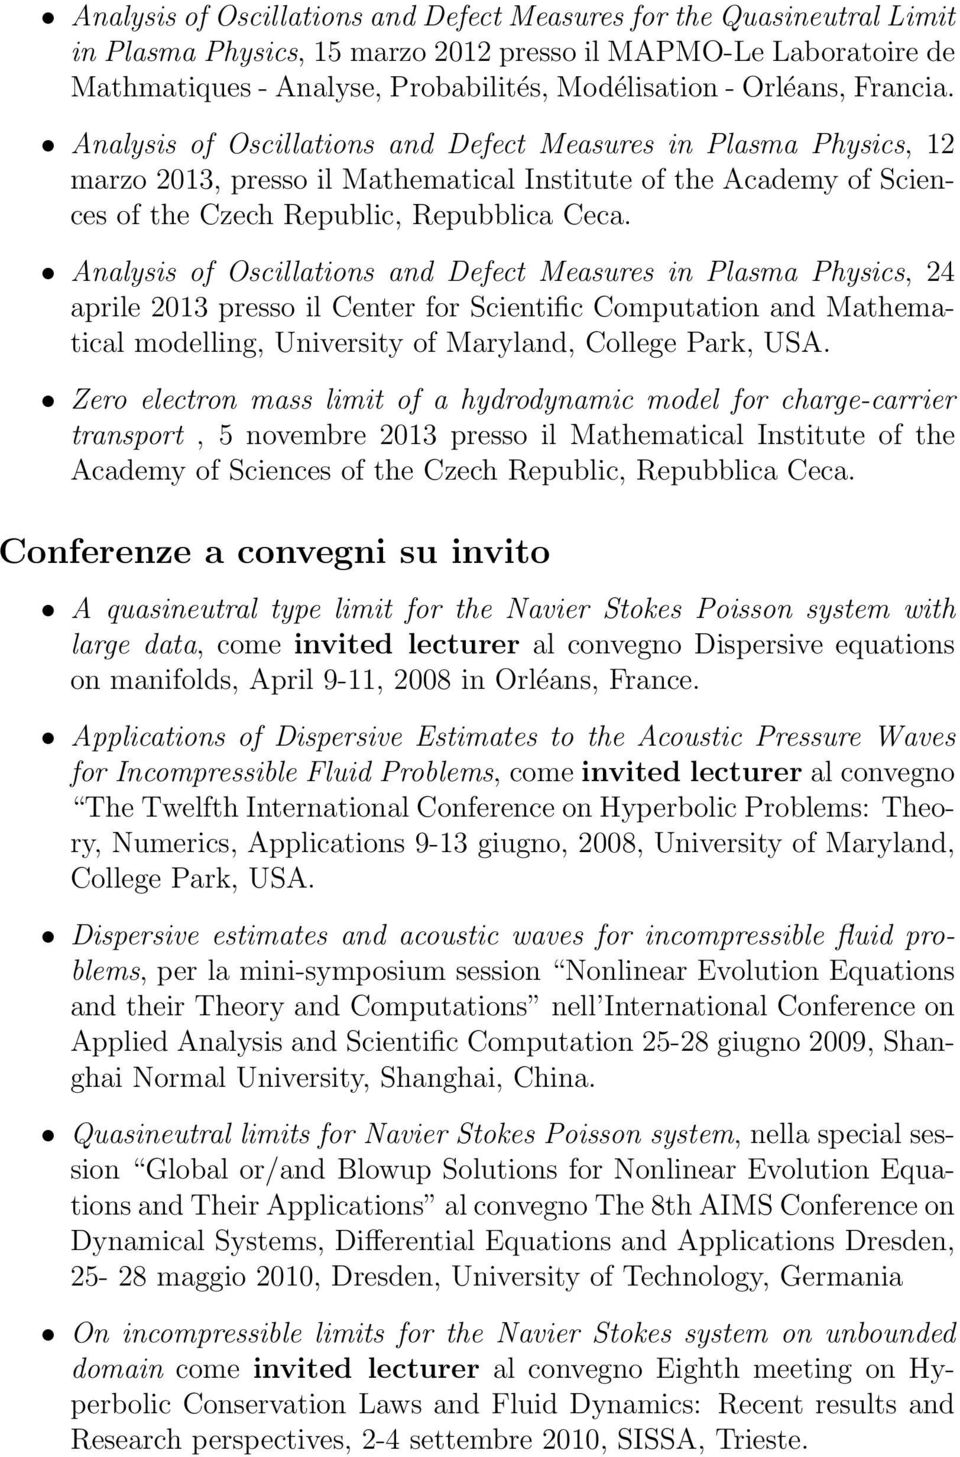 Analysis of Oscillations and Defect Measures in Plasma Physics, 24 aprile 2013 presso il Center for Scientific Computation and Mathematical modelling, University of Maryland, College Park, USA.